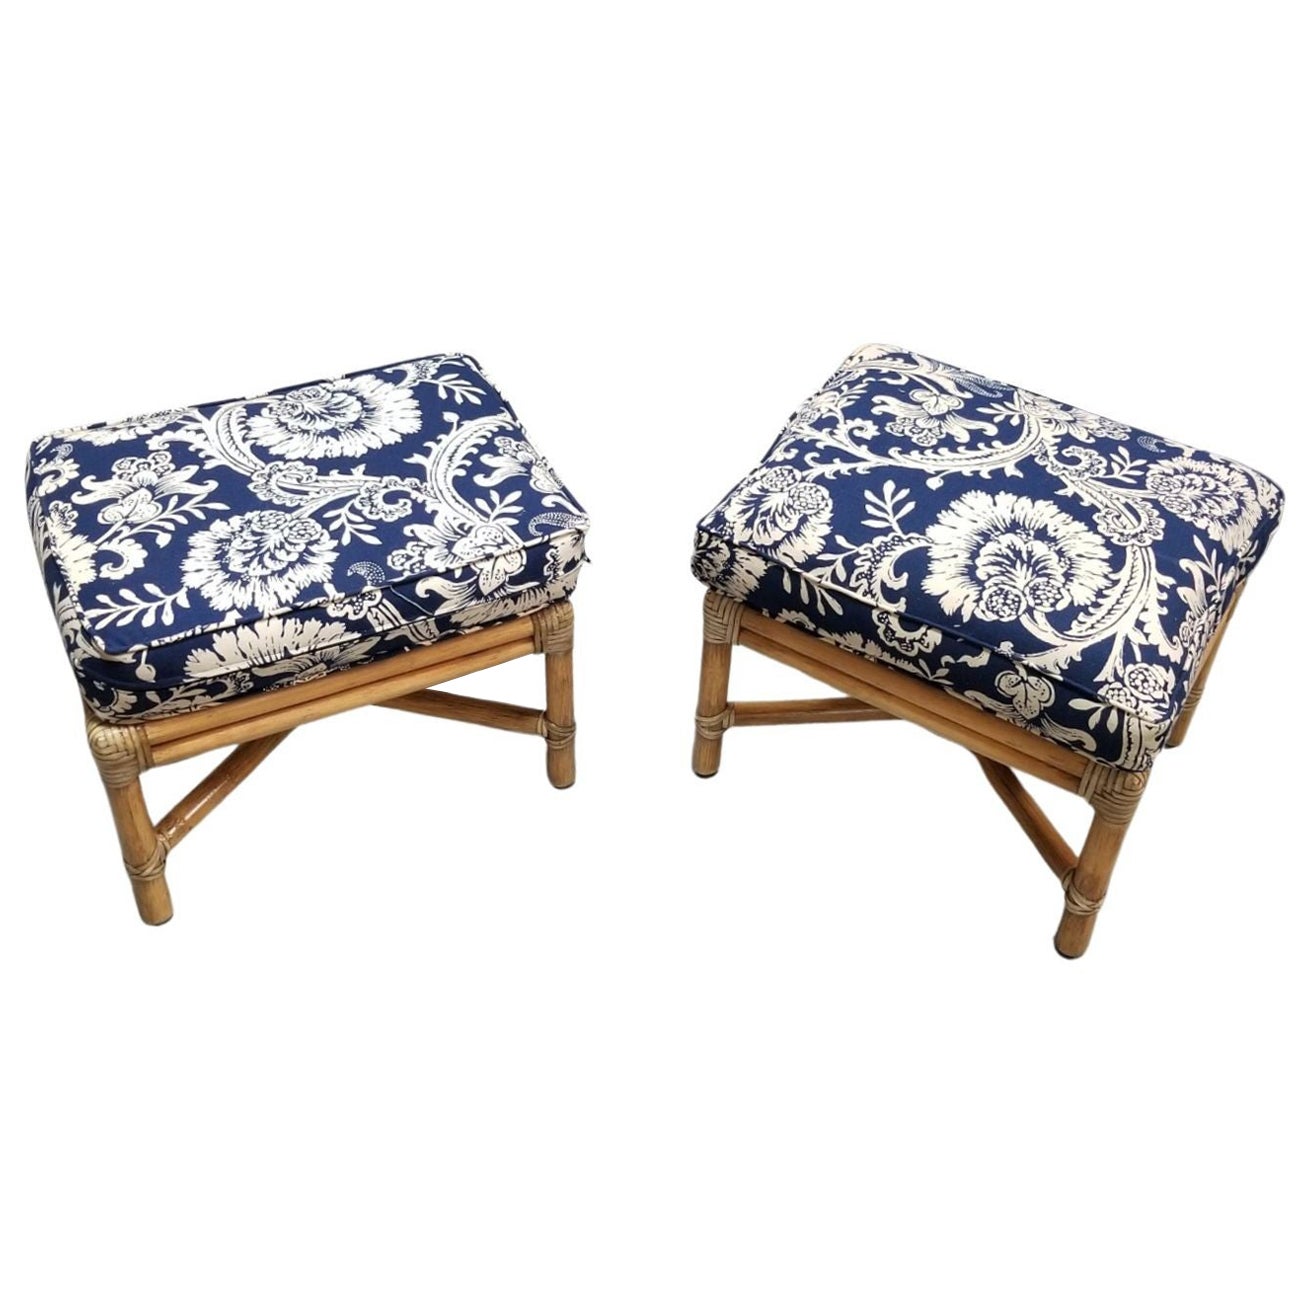 Restored Leather Wrapped Rattan Footstool Pair Signed by McGuire